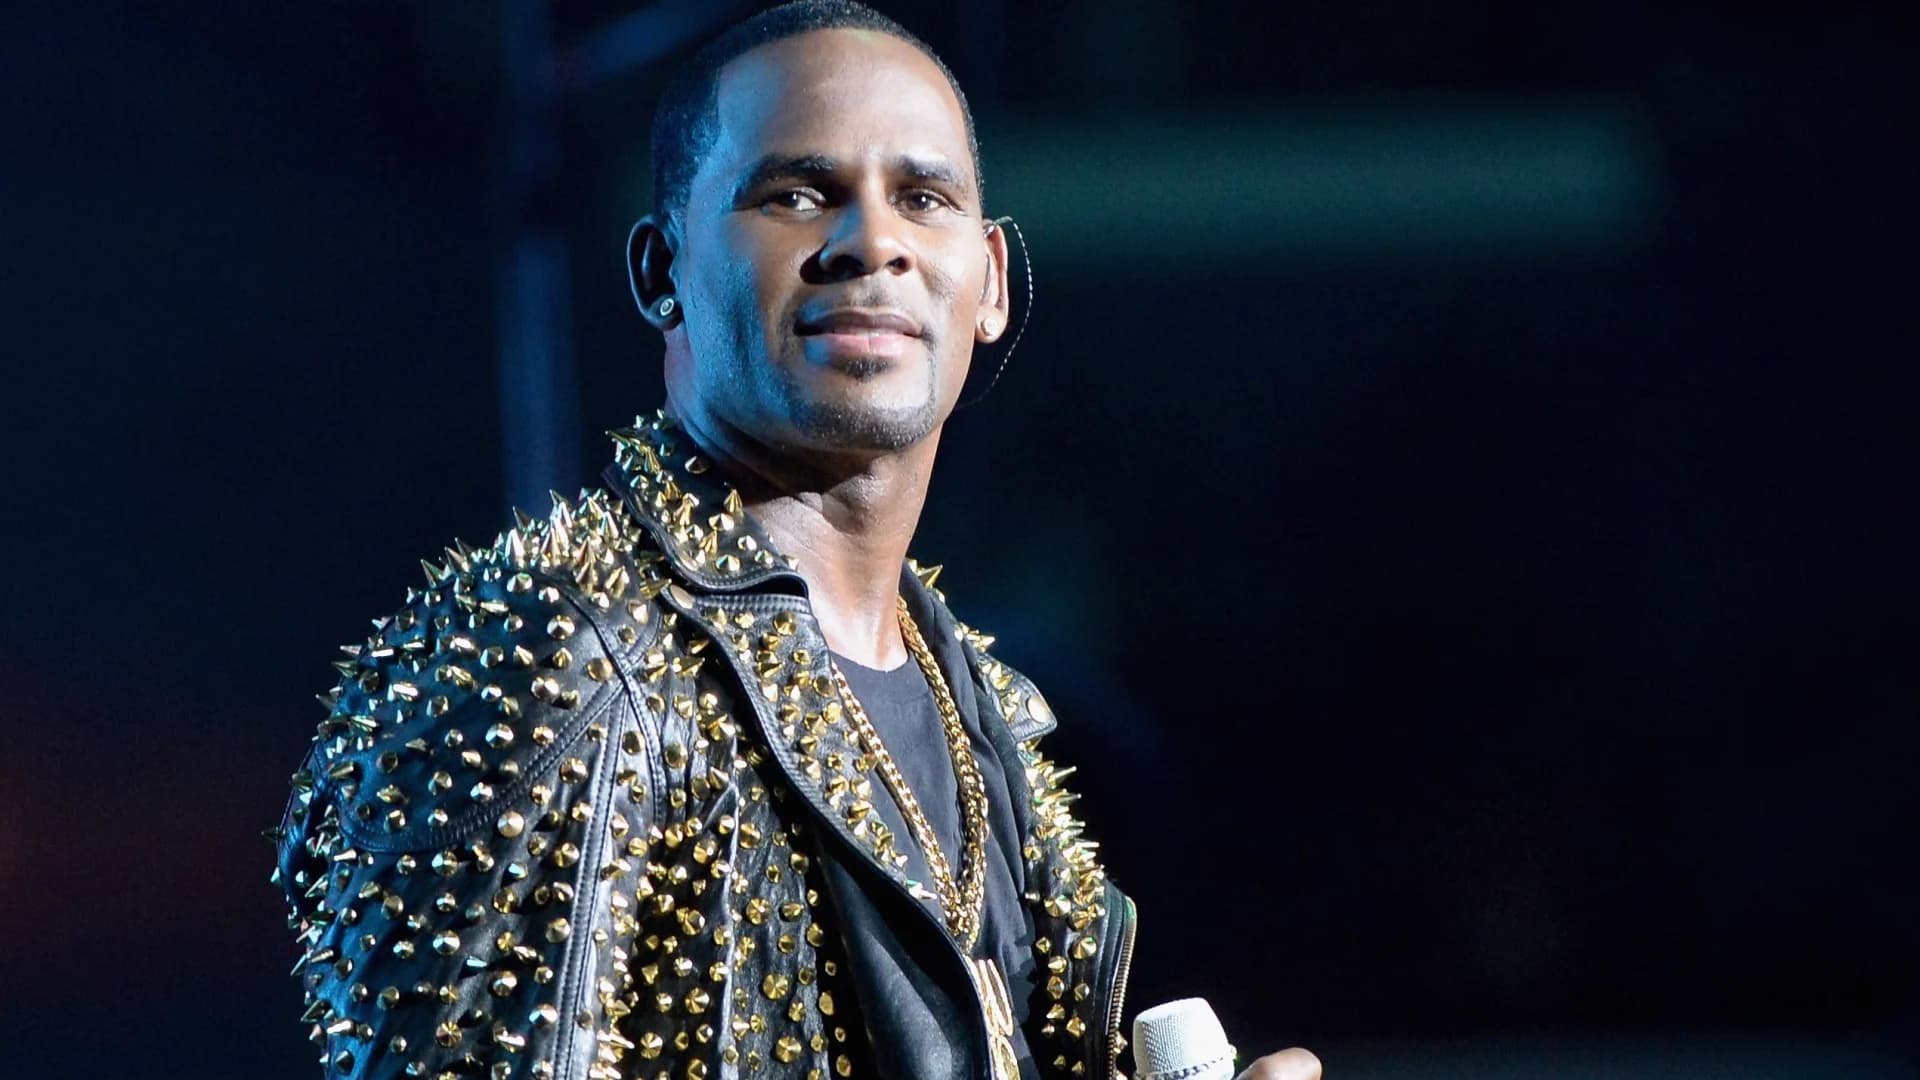 R. Kelly denies sex abuse charges in fiery interview